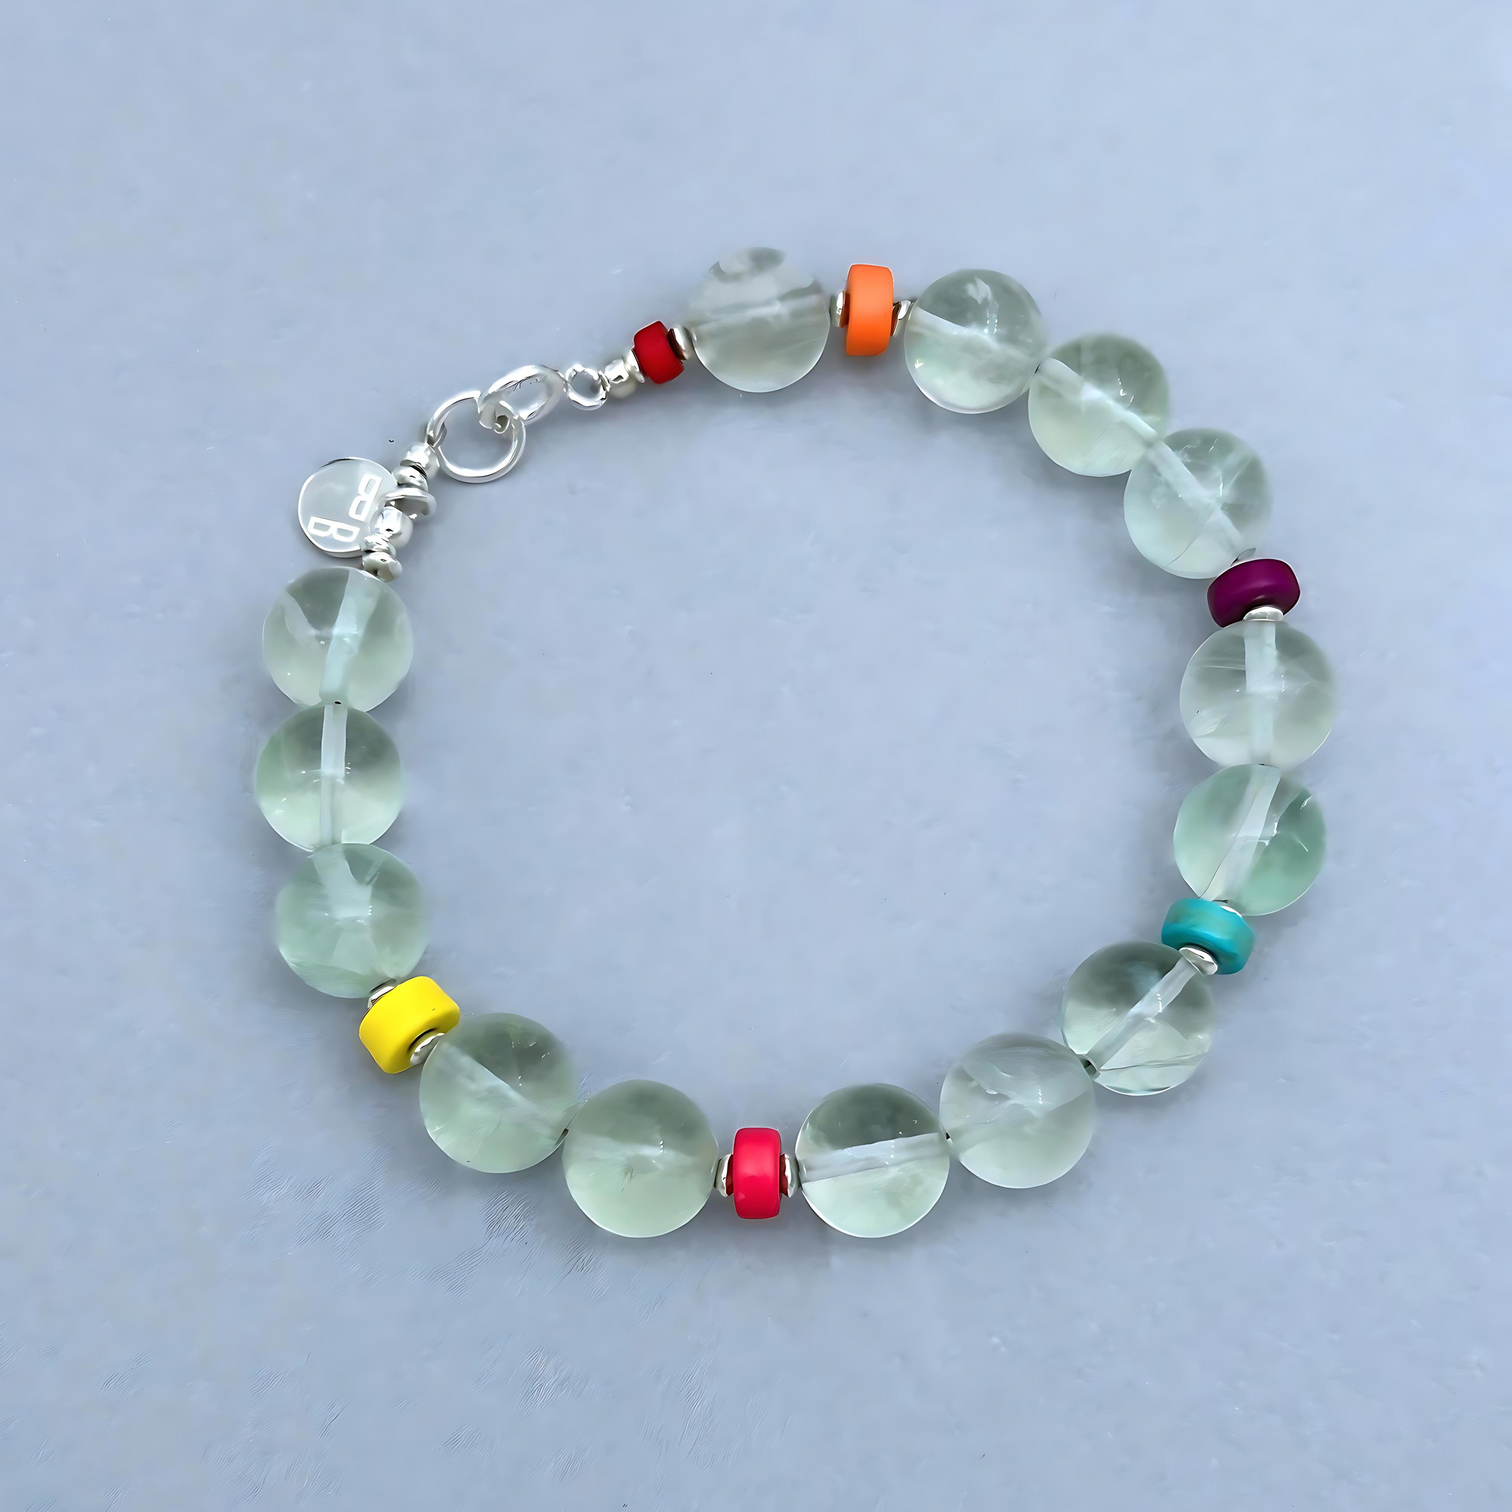 The JENIFER Bracelet is a fun and uplifting accessory. The beautiful pale blue Fluorite Beads combined with rainbow-hued Howlite Discs are everything else but boring. 